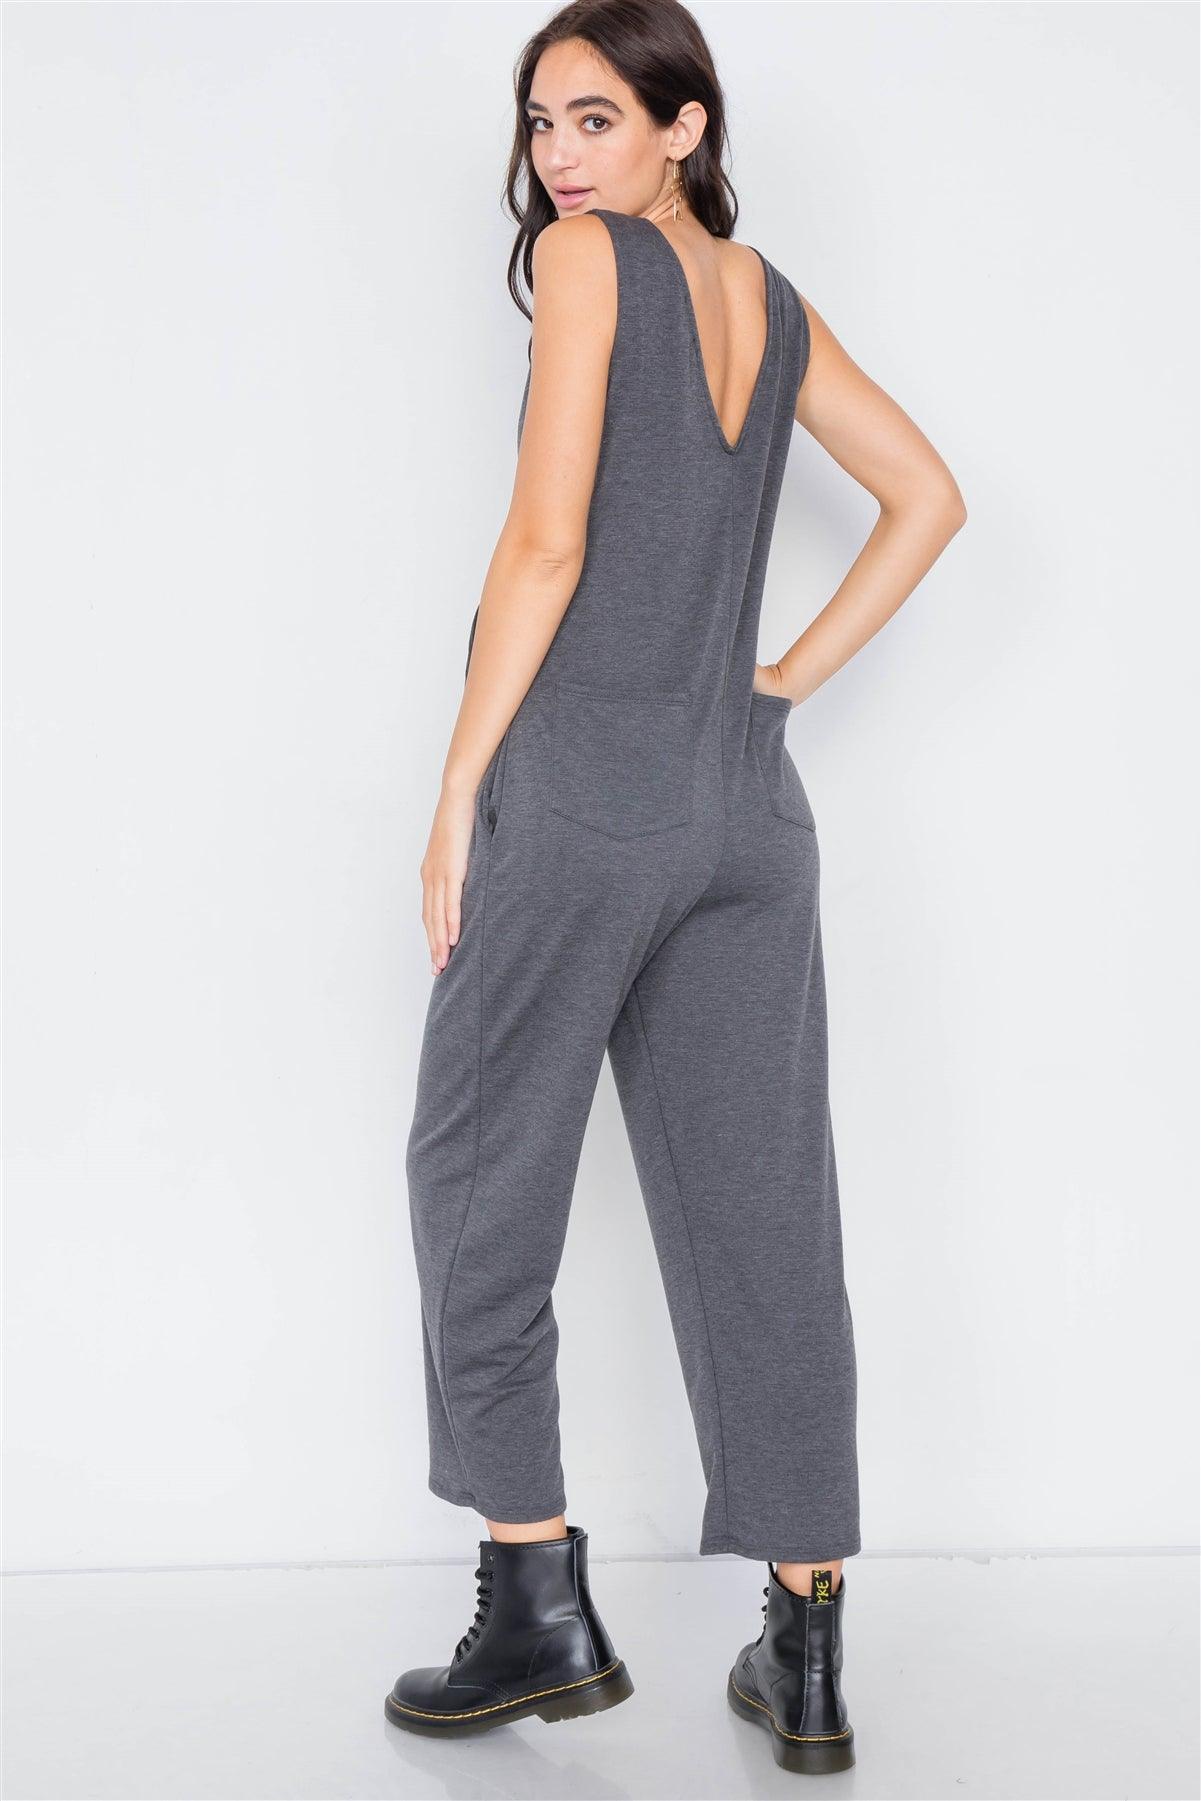 Charcoal Marled Knit Mock Wrap Ankle Length Jumpsuit /2-2-2